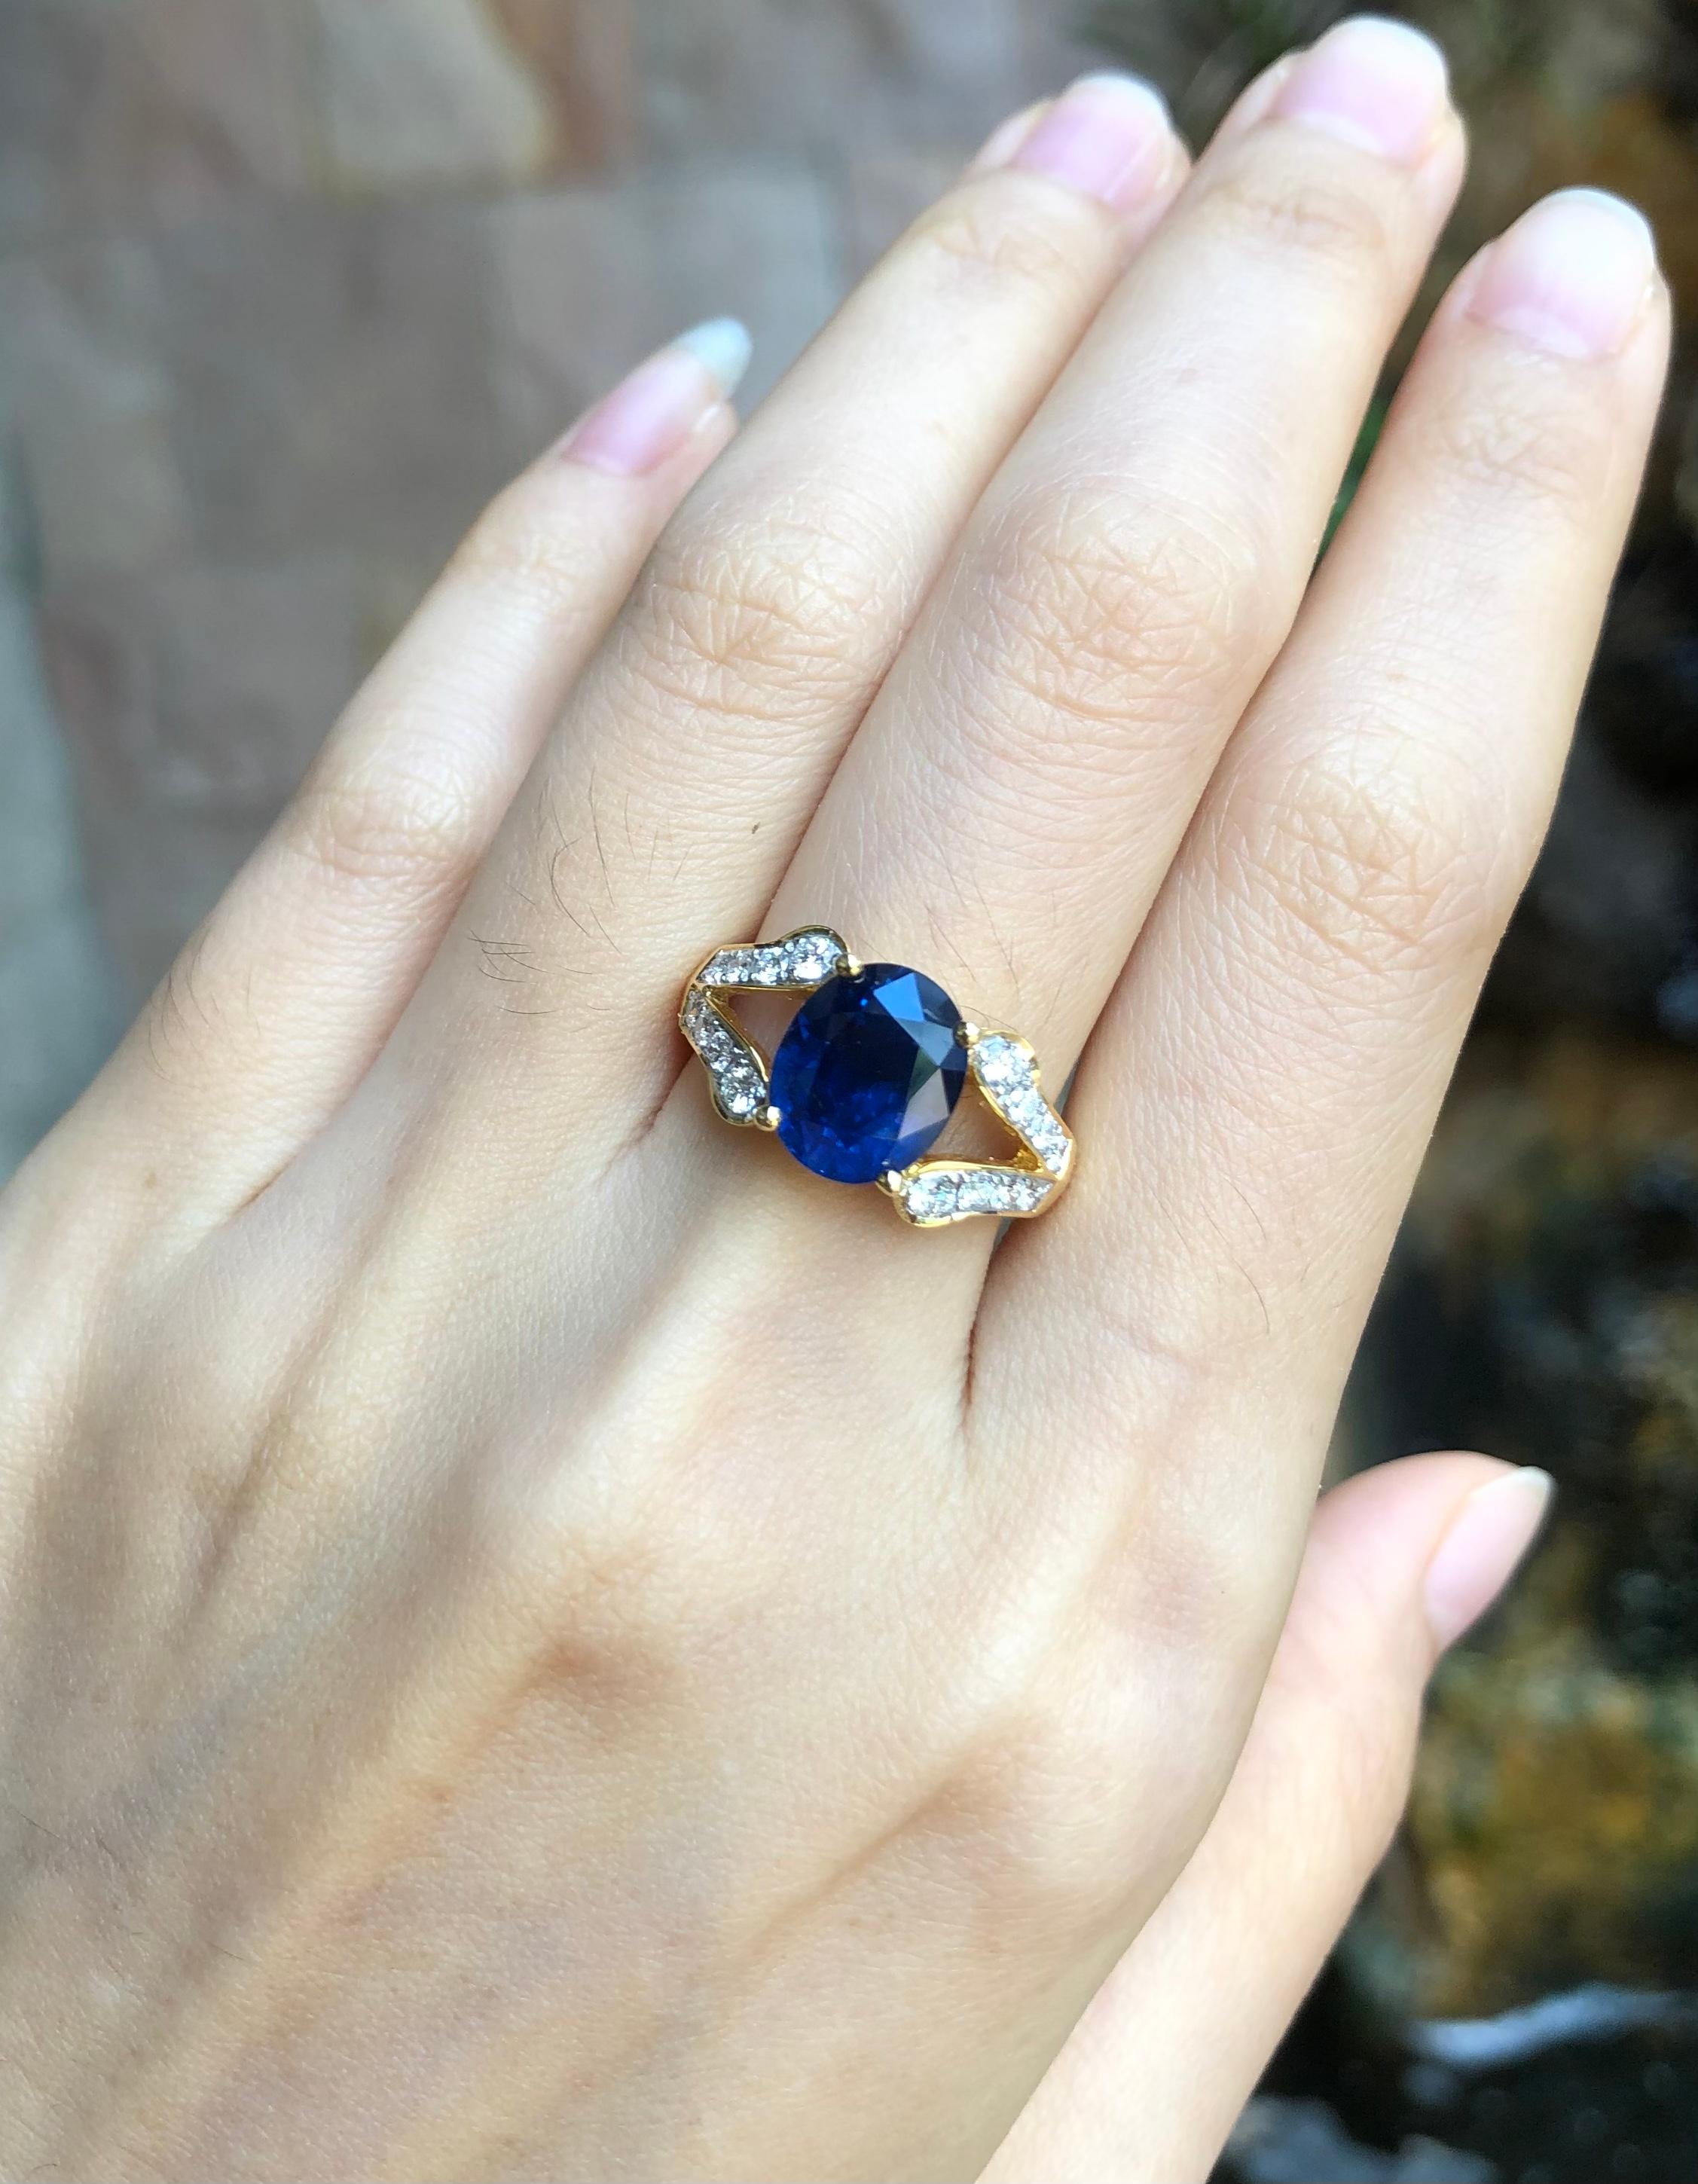 Blue Sapphire 4.13 carats with Diamond 0.43 carat Ring set in 18 Karat Gold Settings

Width:  0.8 cm 
Length: 1.0 cm
Ring Size: 53
Total Weight: 5.91 grams

